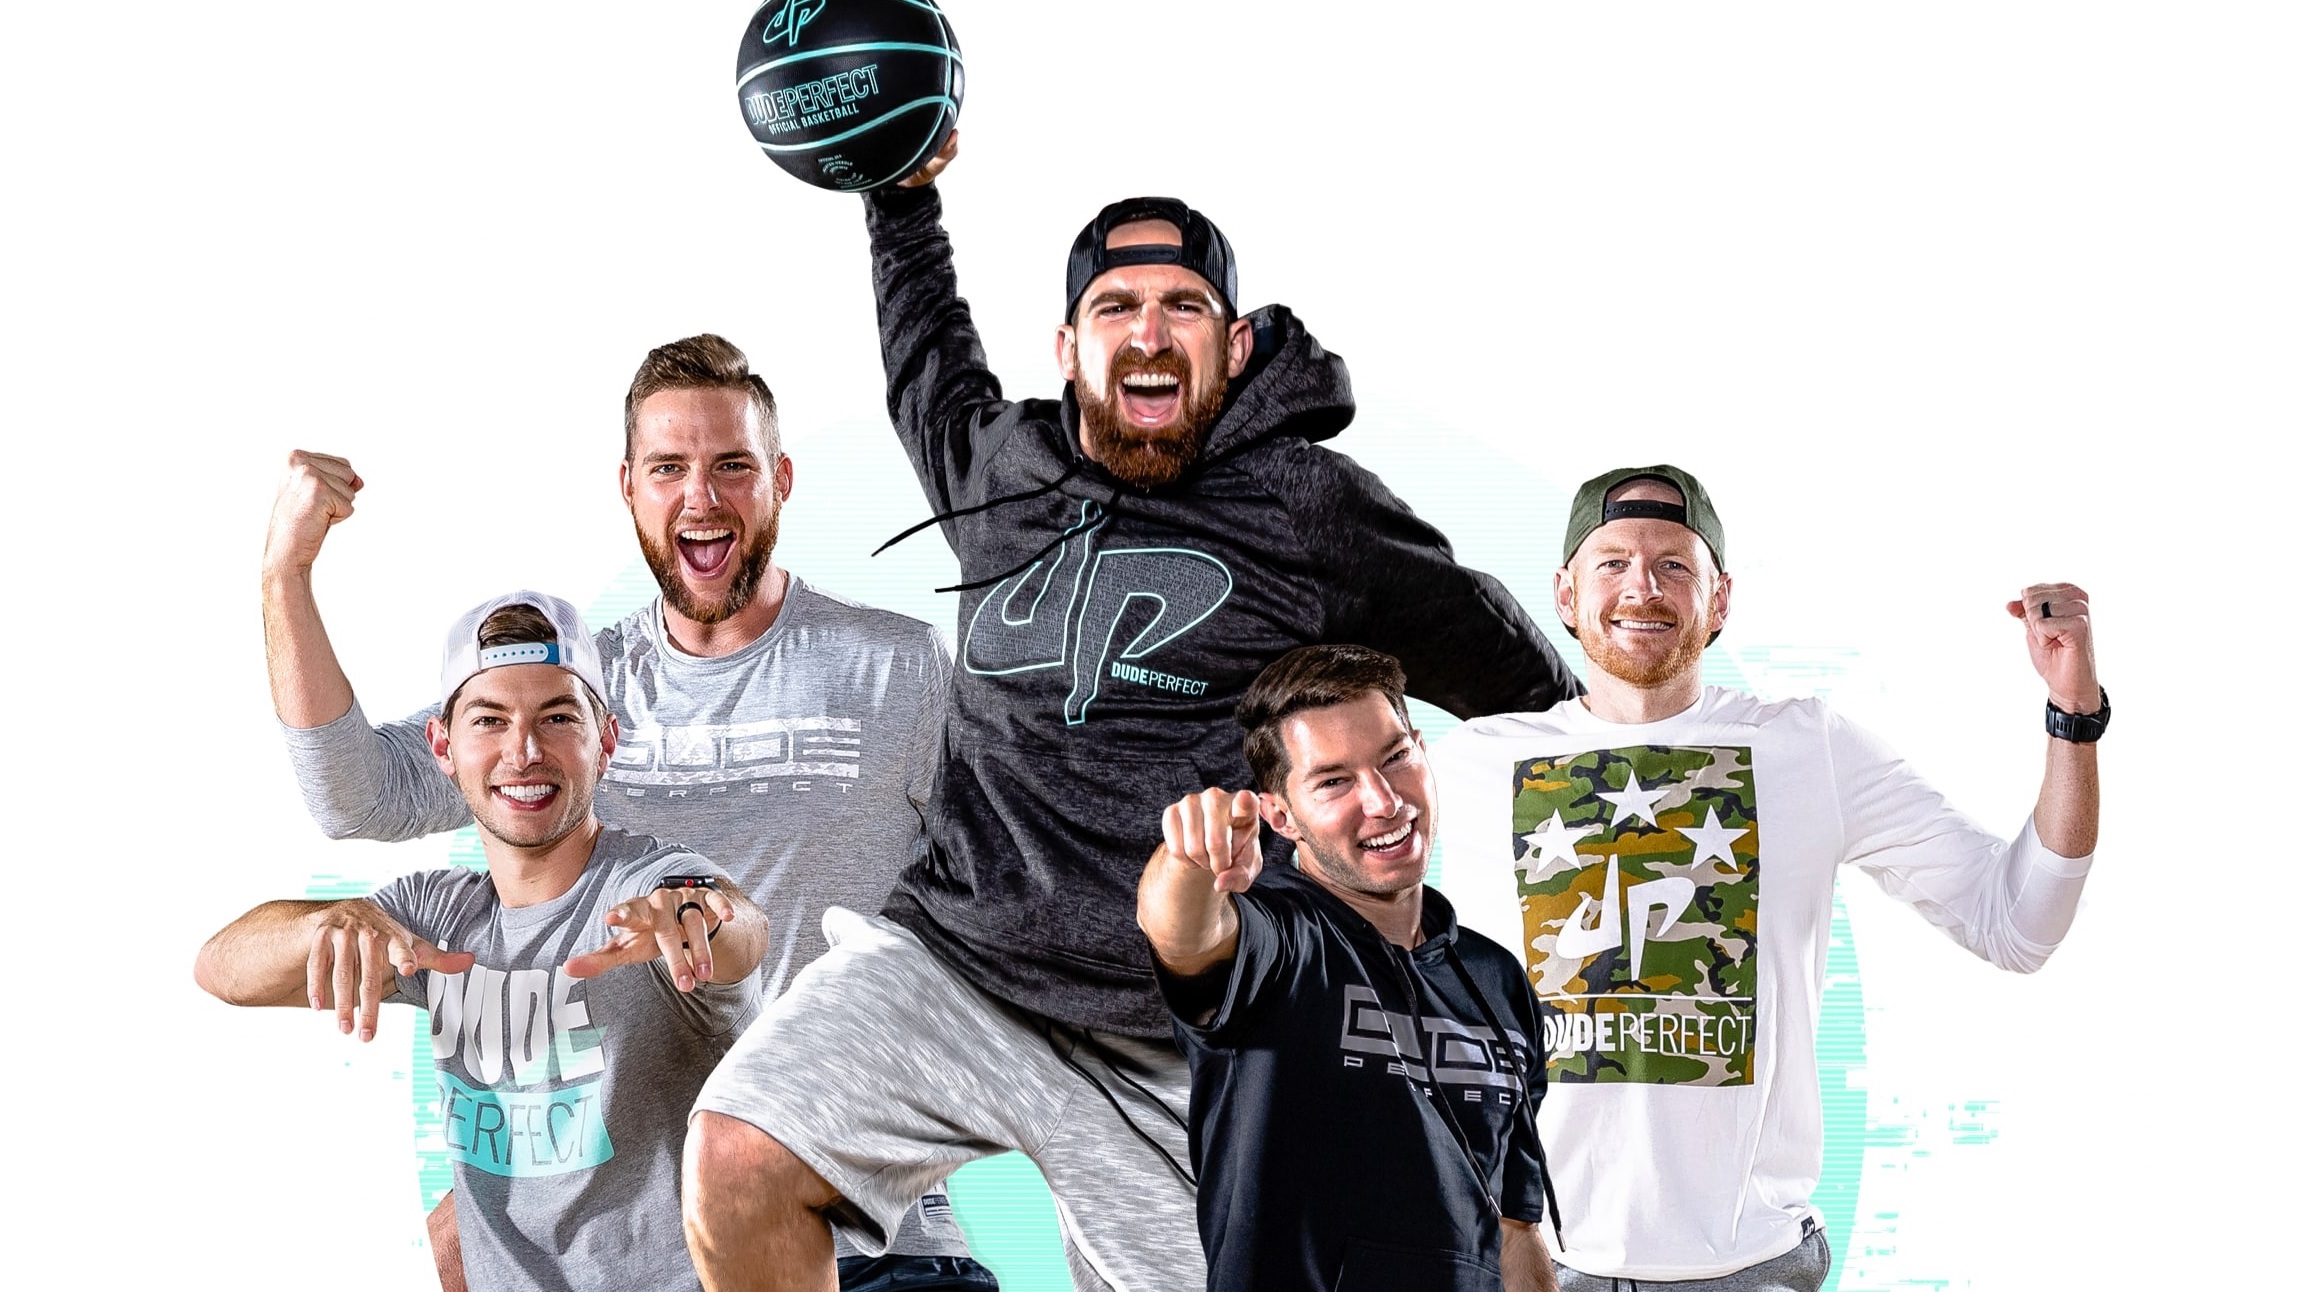 Dude Perfect - TommyInnit Shop